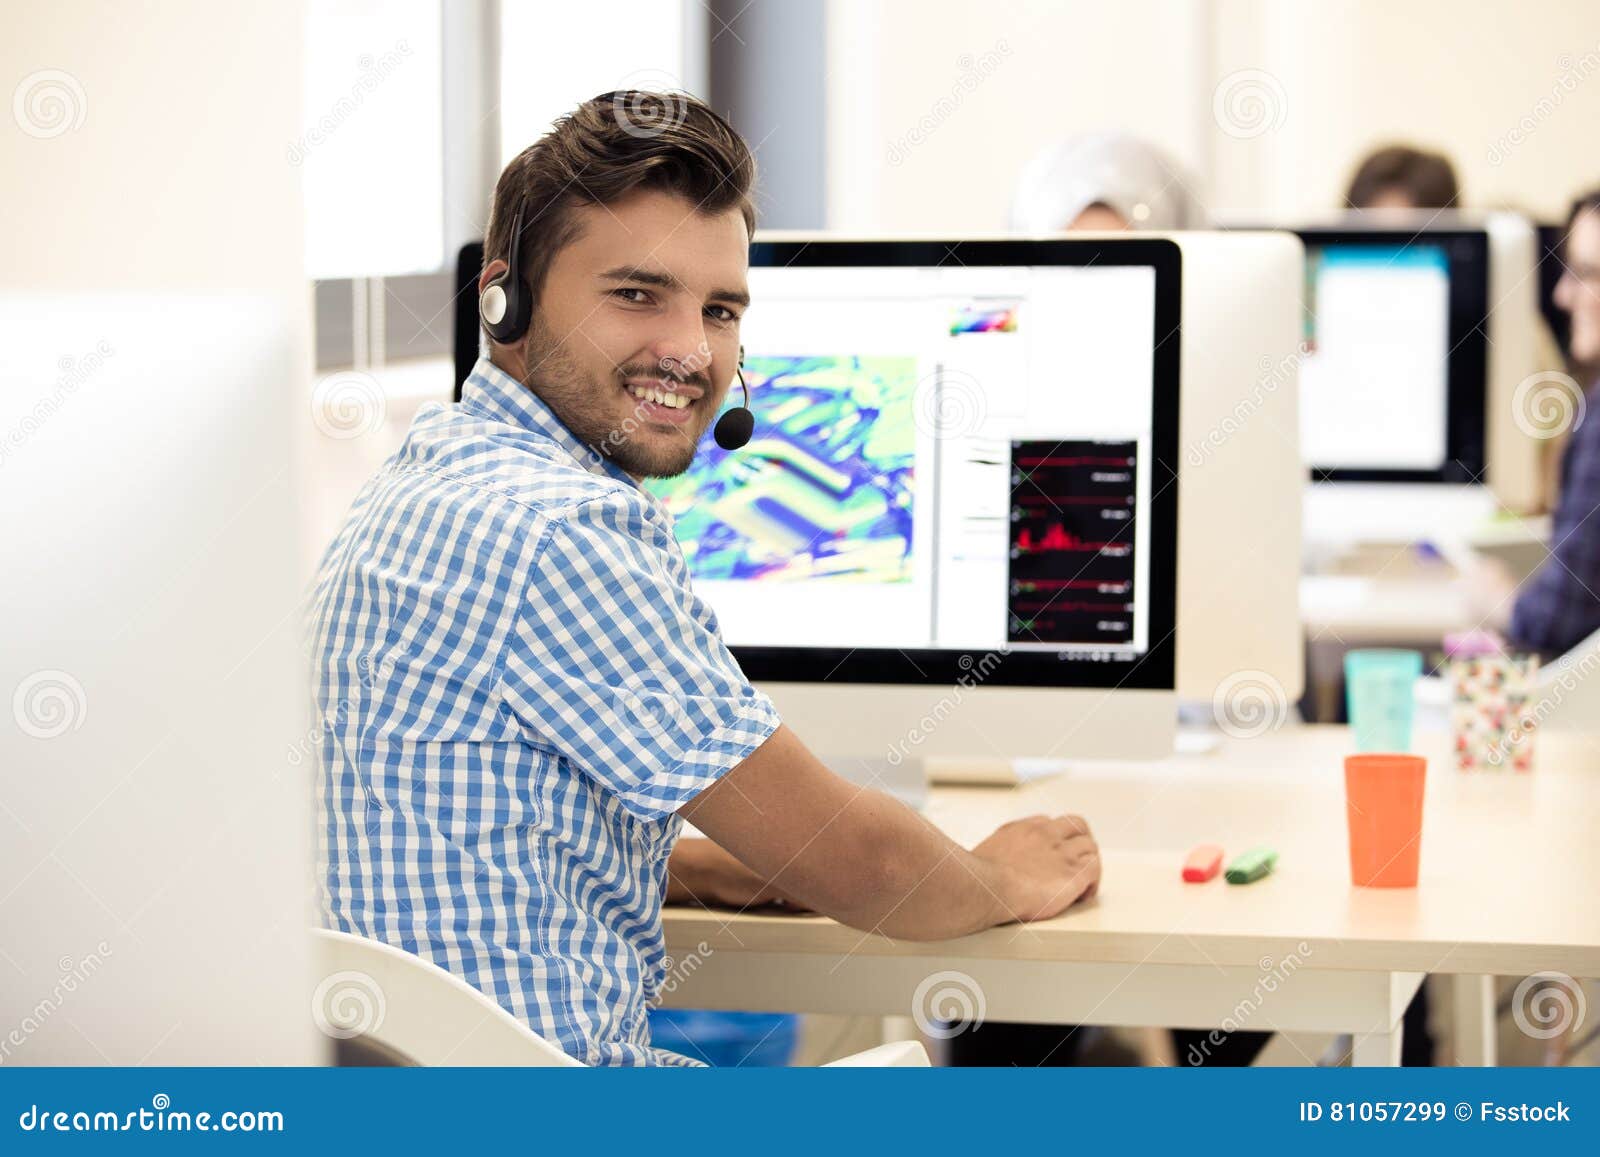 Man Working At Desk In Busy Creative Office Stock Image Image Of